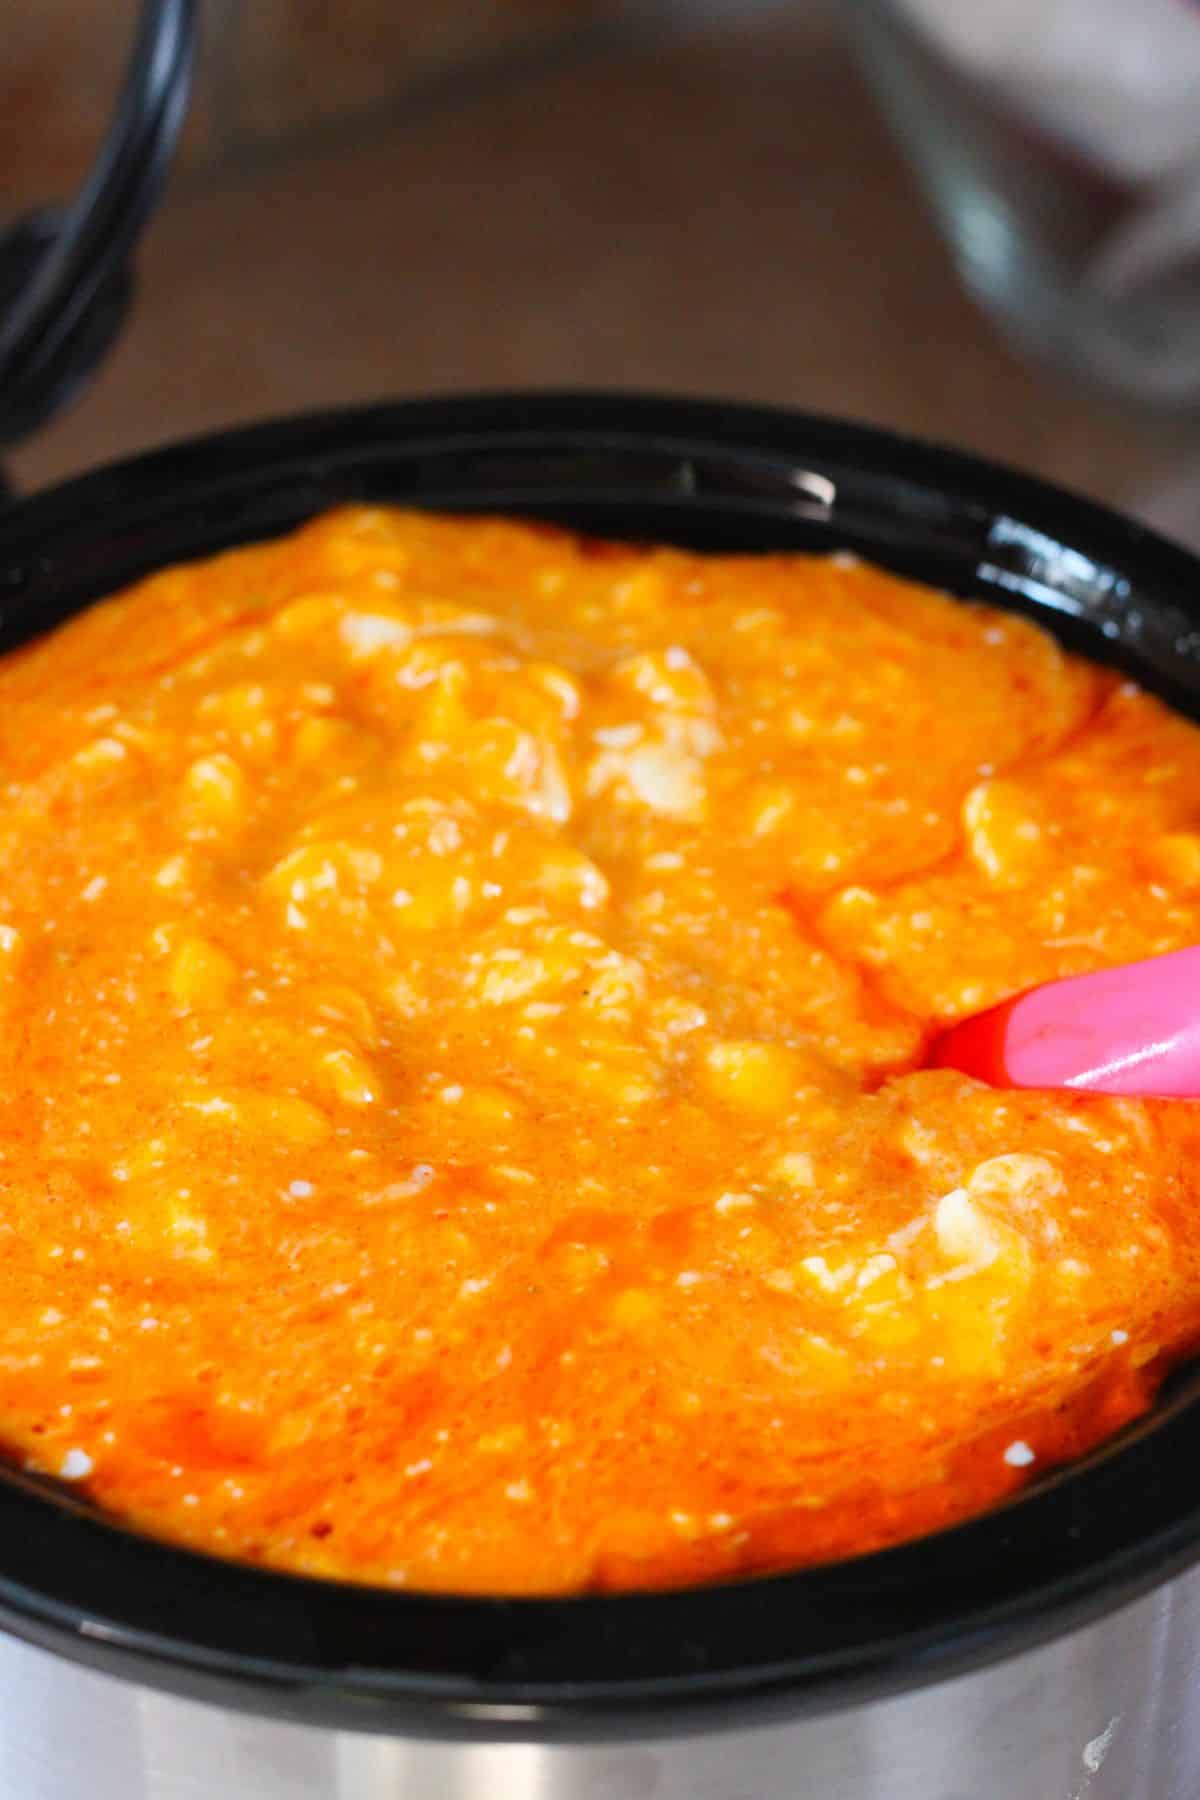 buffalo chicken dip being cooked in the slow cooker.